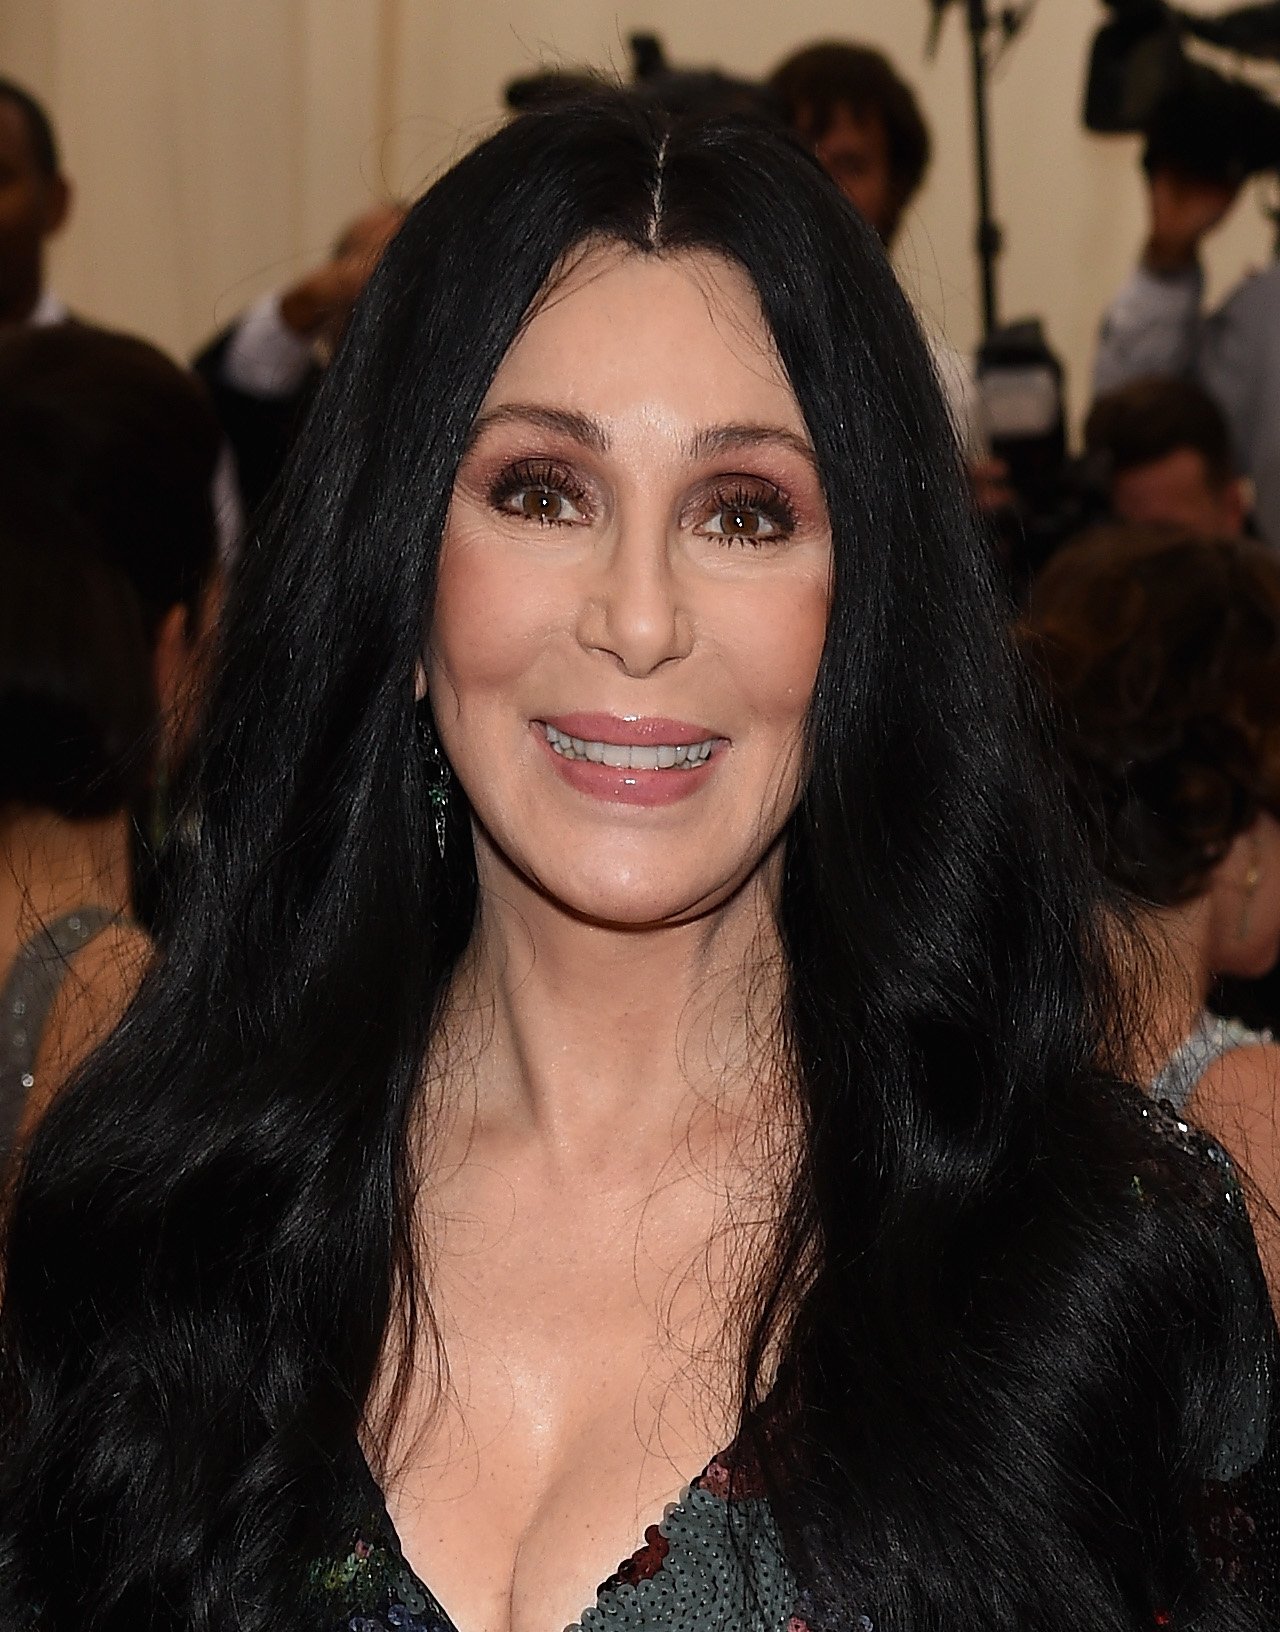 Cher attends the "China: Through The Looking Glass" Costume Institute Benefit Gala at the Metropolitan Museum of Art on May 4, 2015, in New York City. | Source: Getty Images.